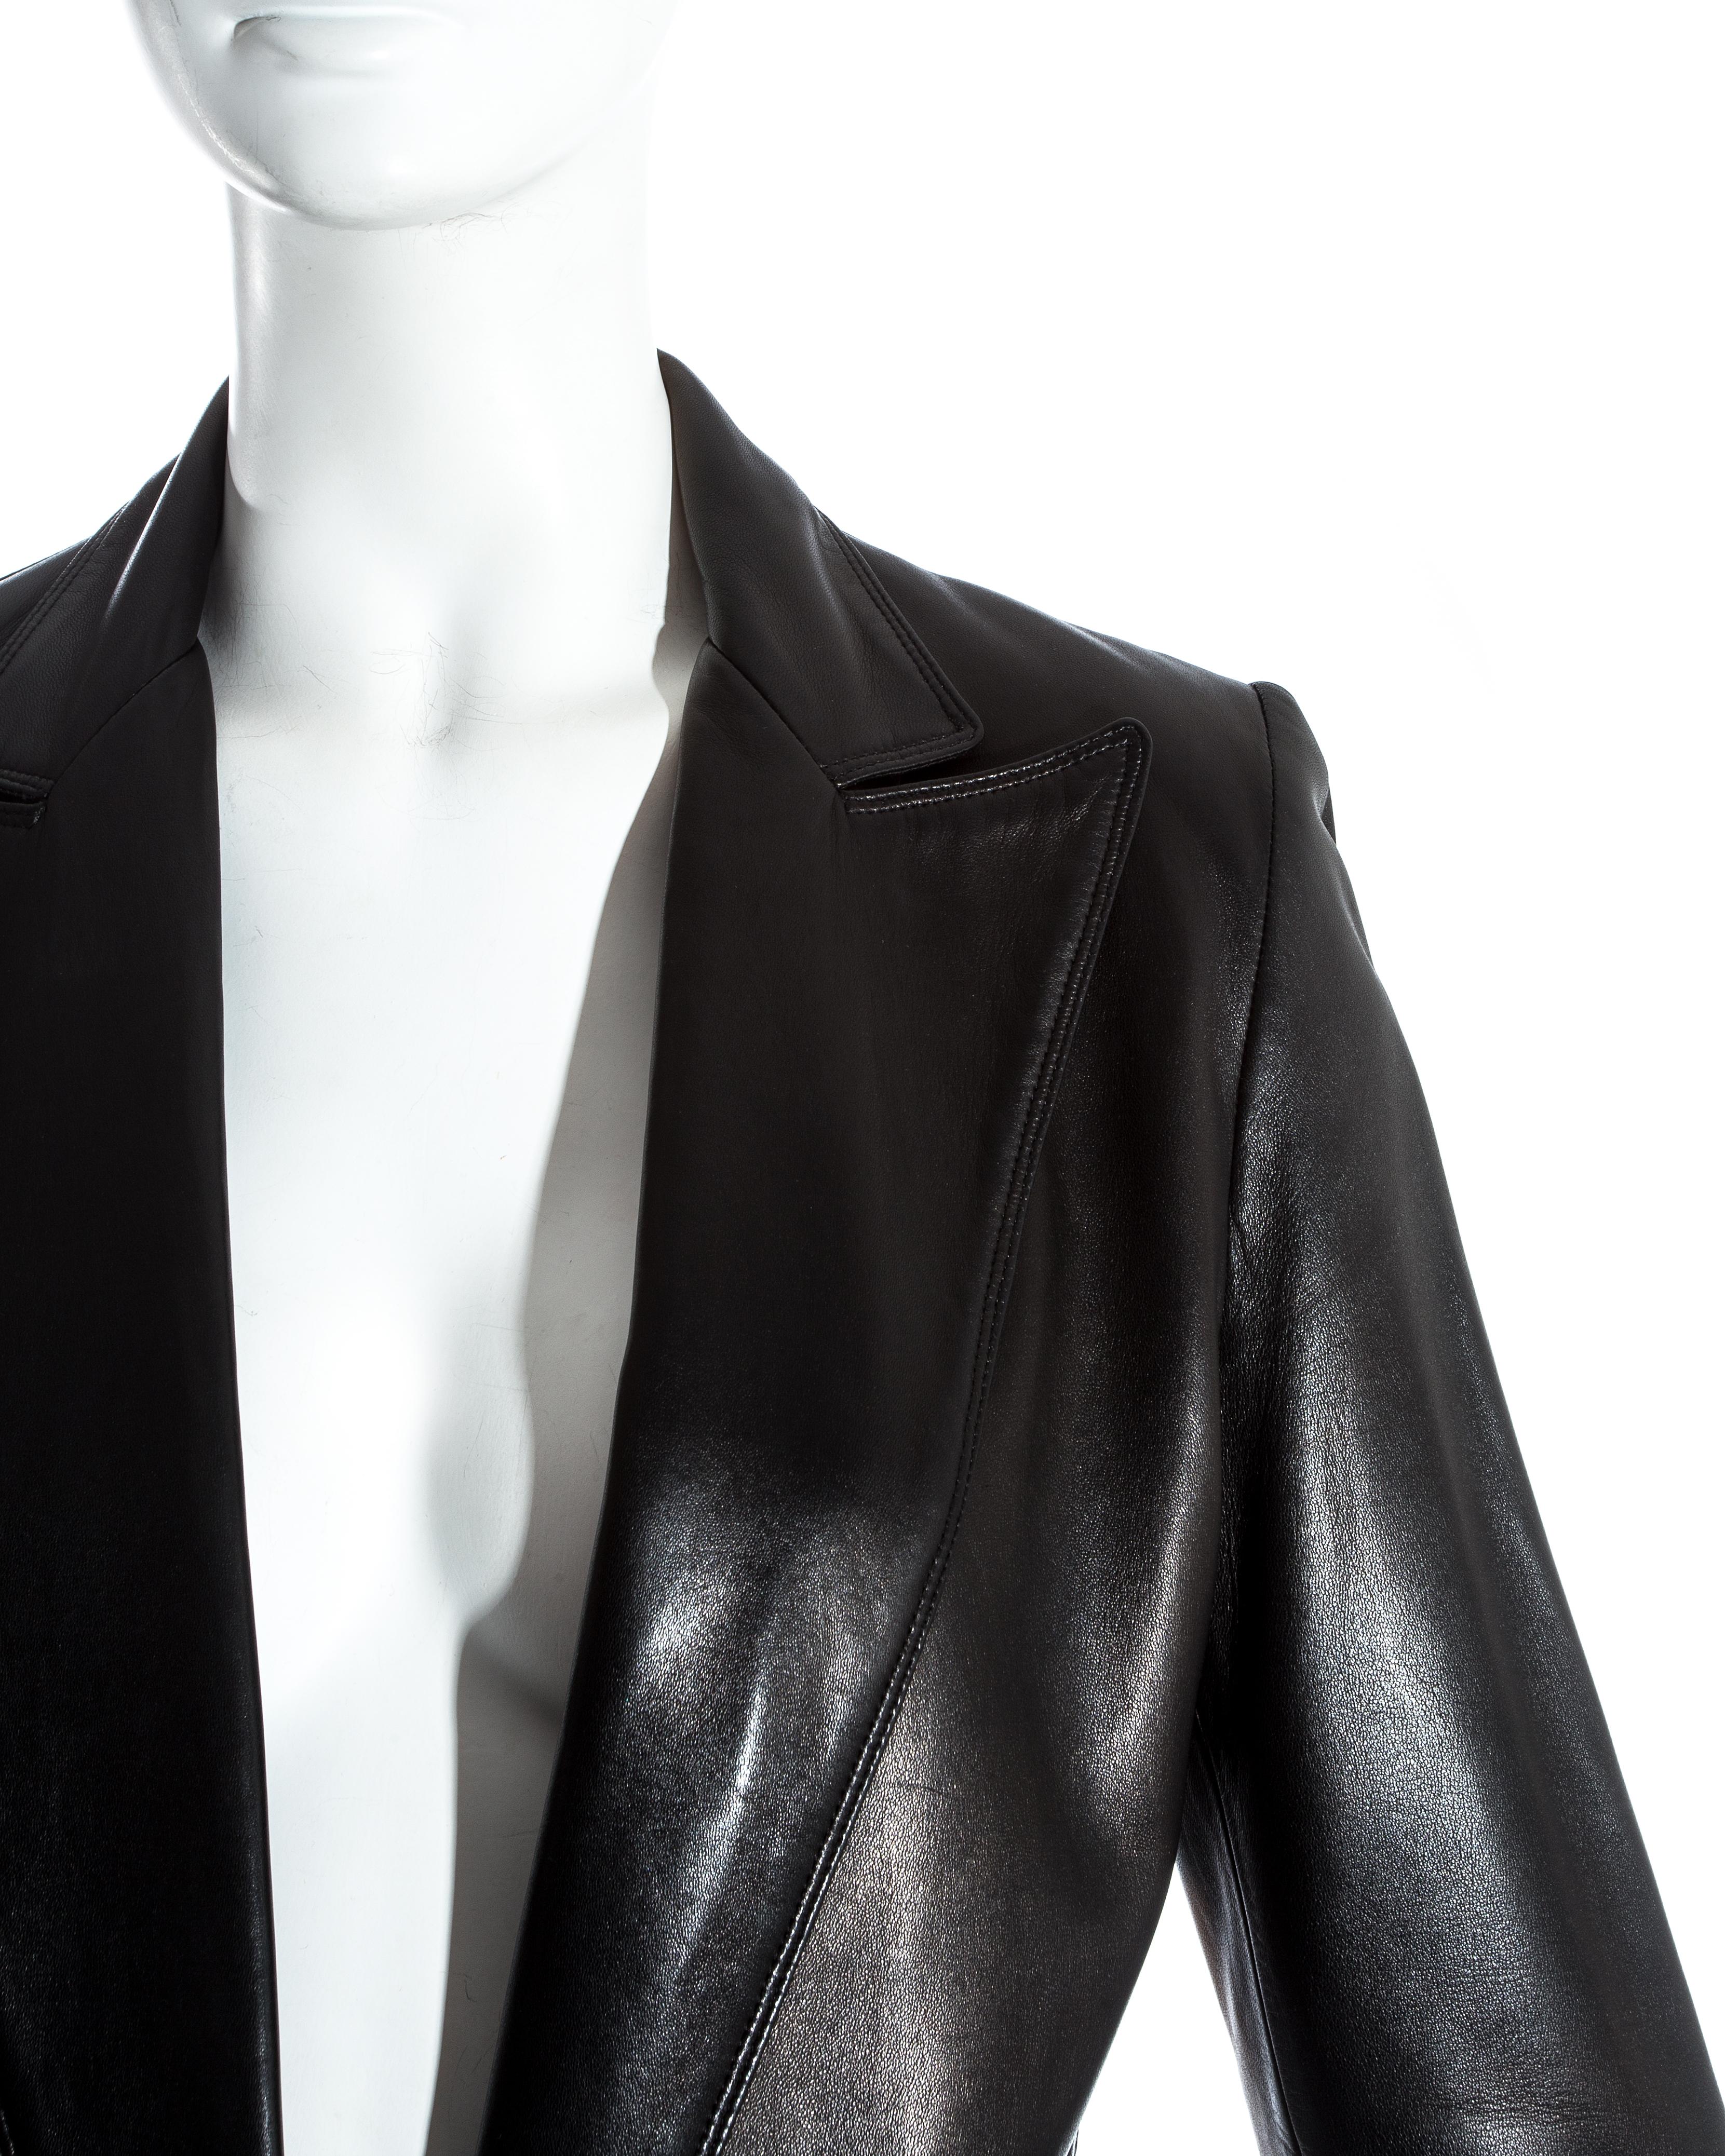 Gianni Versace black lambskin leather blazer jacket and skirt suit, fw 1997 In Good Condition For Sale In London, GB